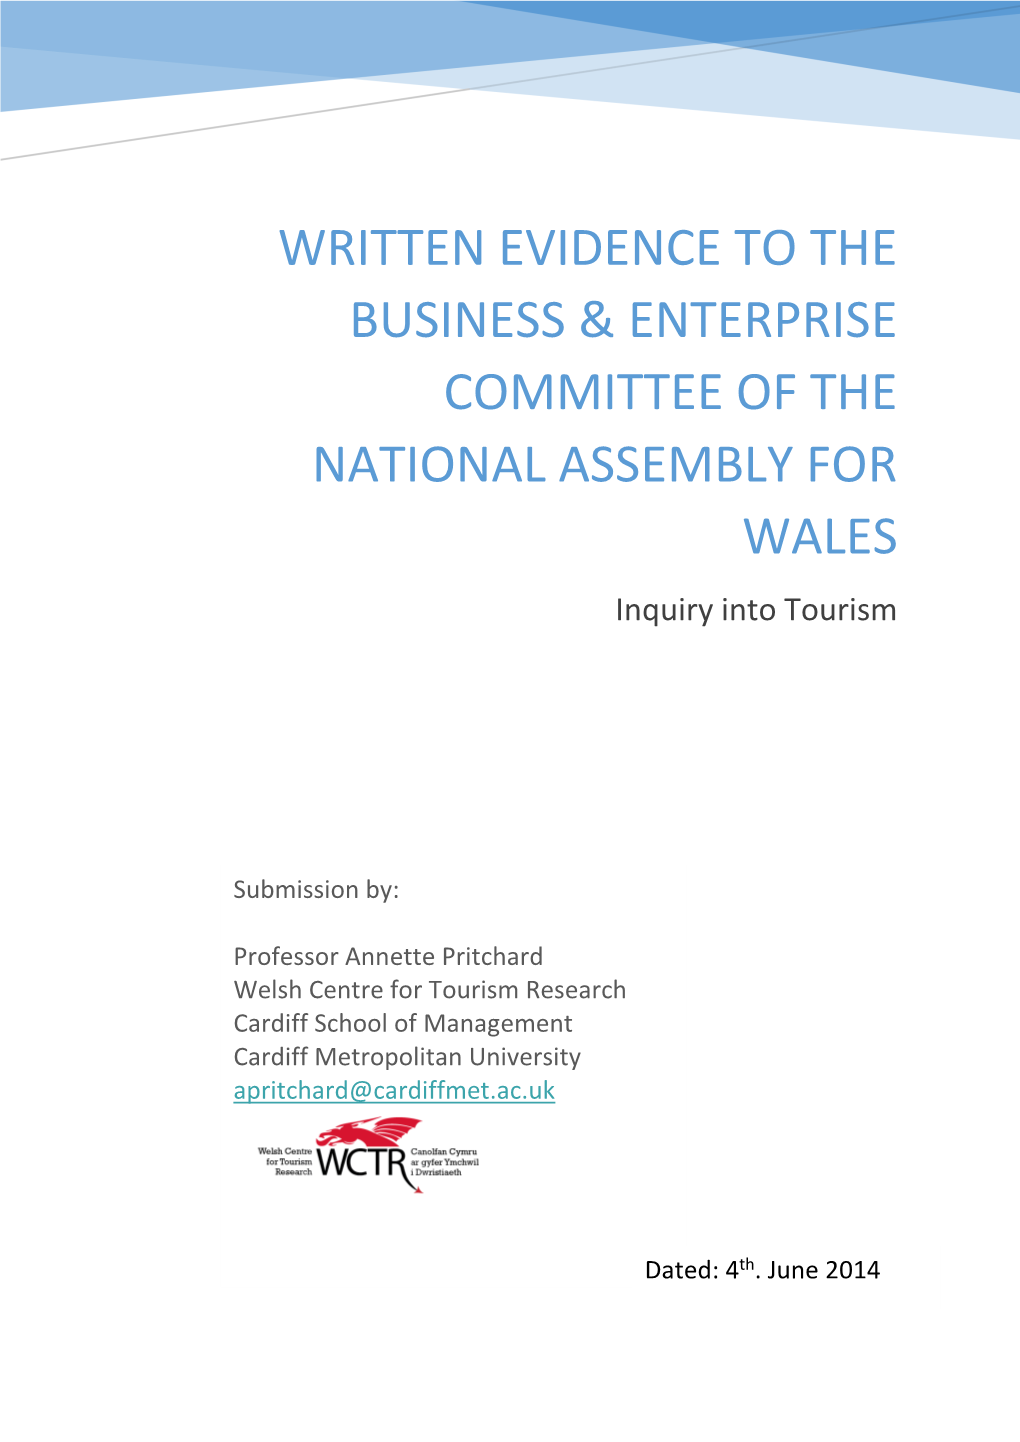 WRITTEN EVIDENCE to the Business & Enterprise COMMITTEE of The